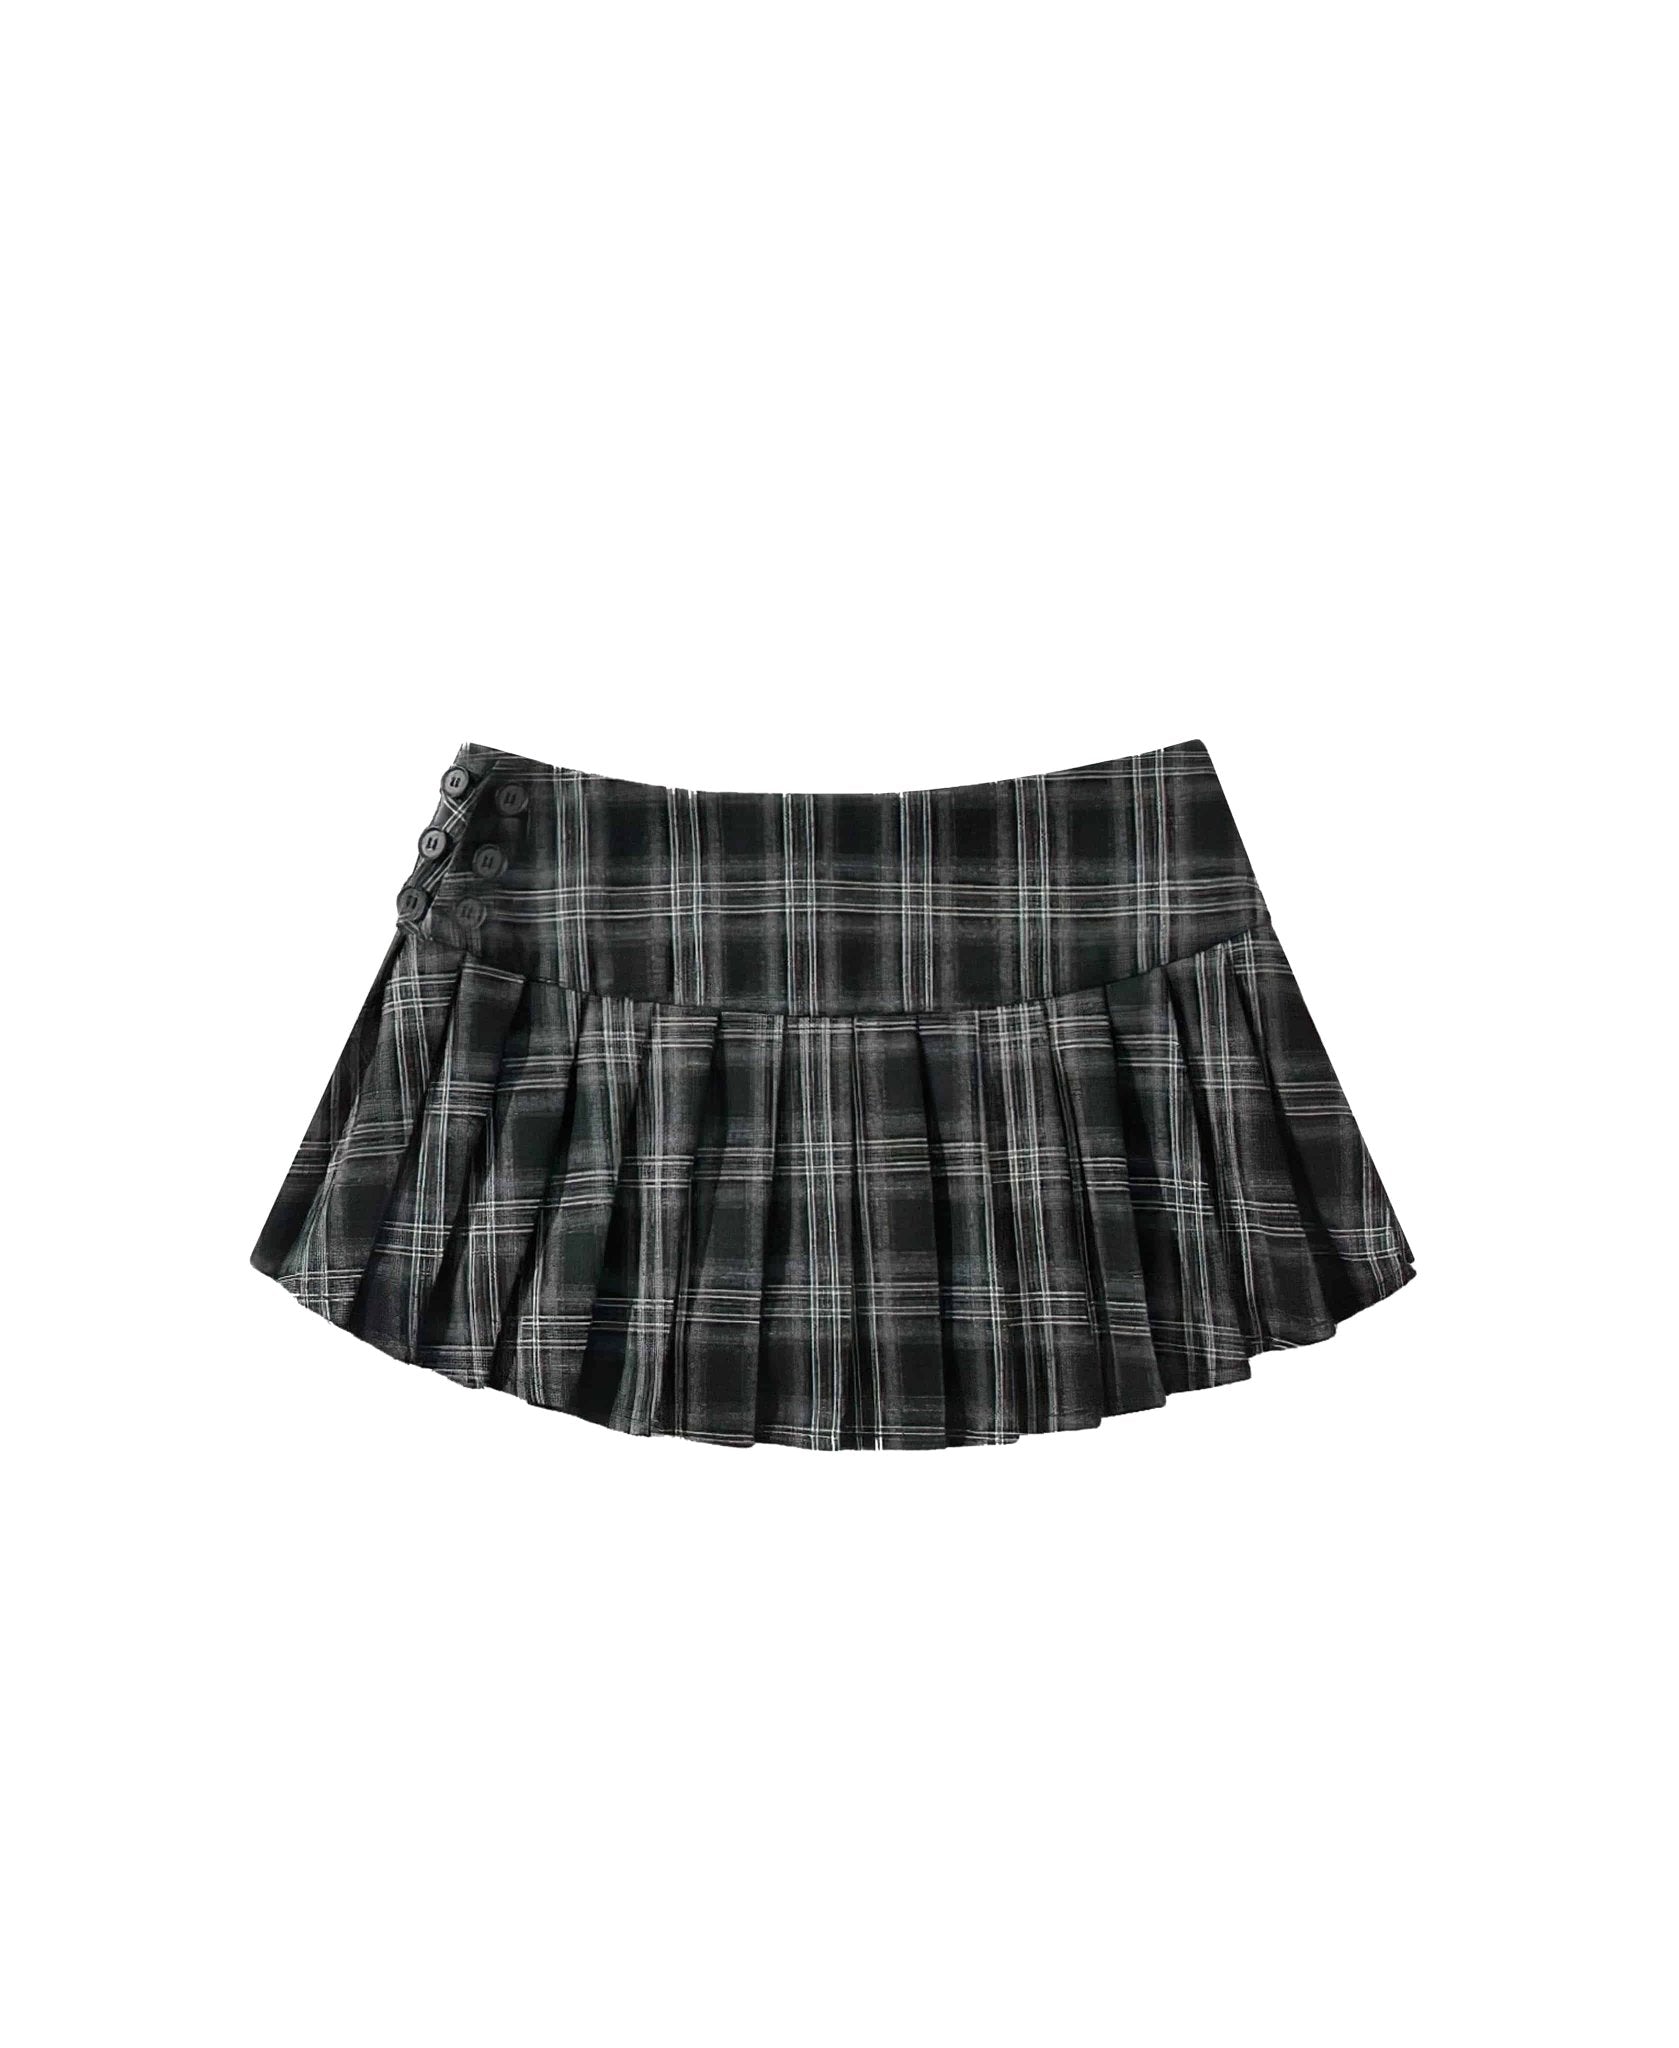 [come out and play] Sandy check skirt - コクモト KOCUMOTO